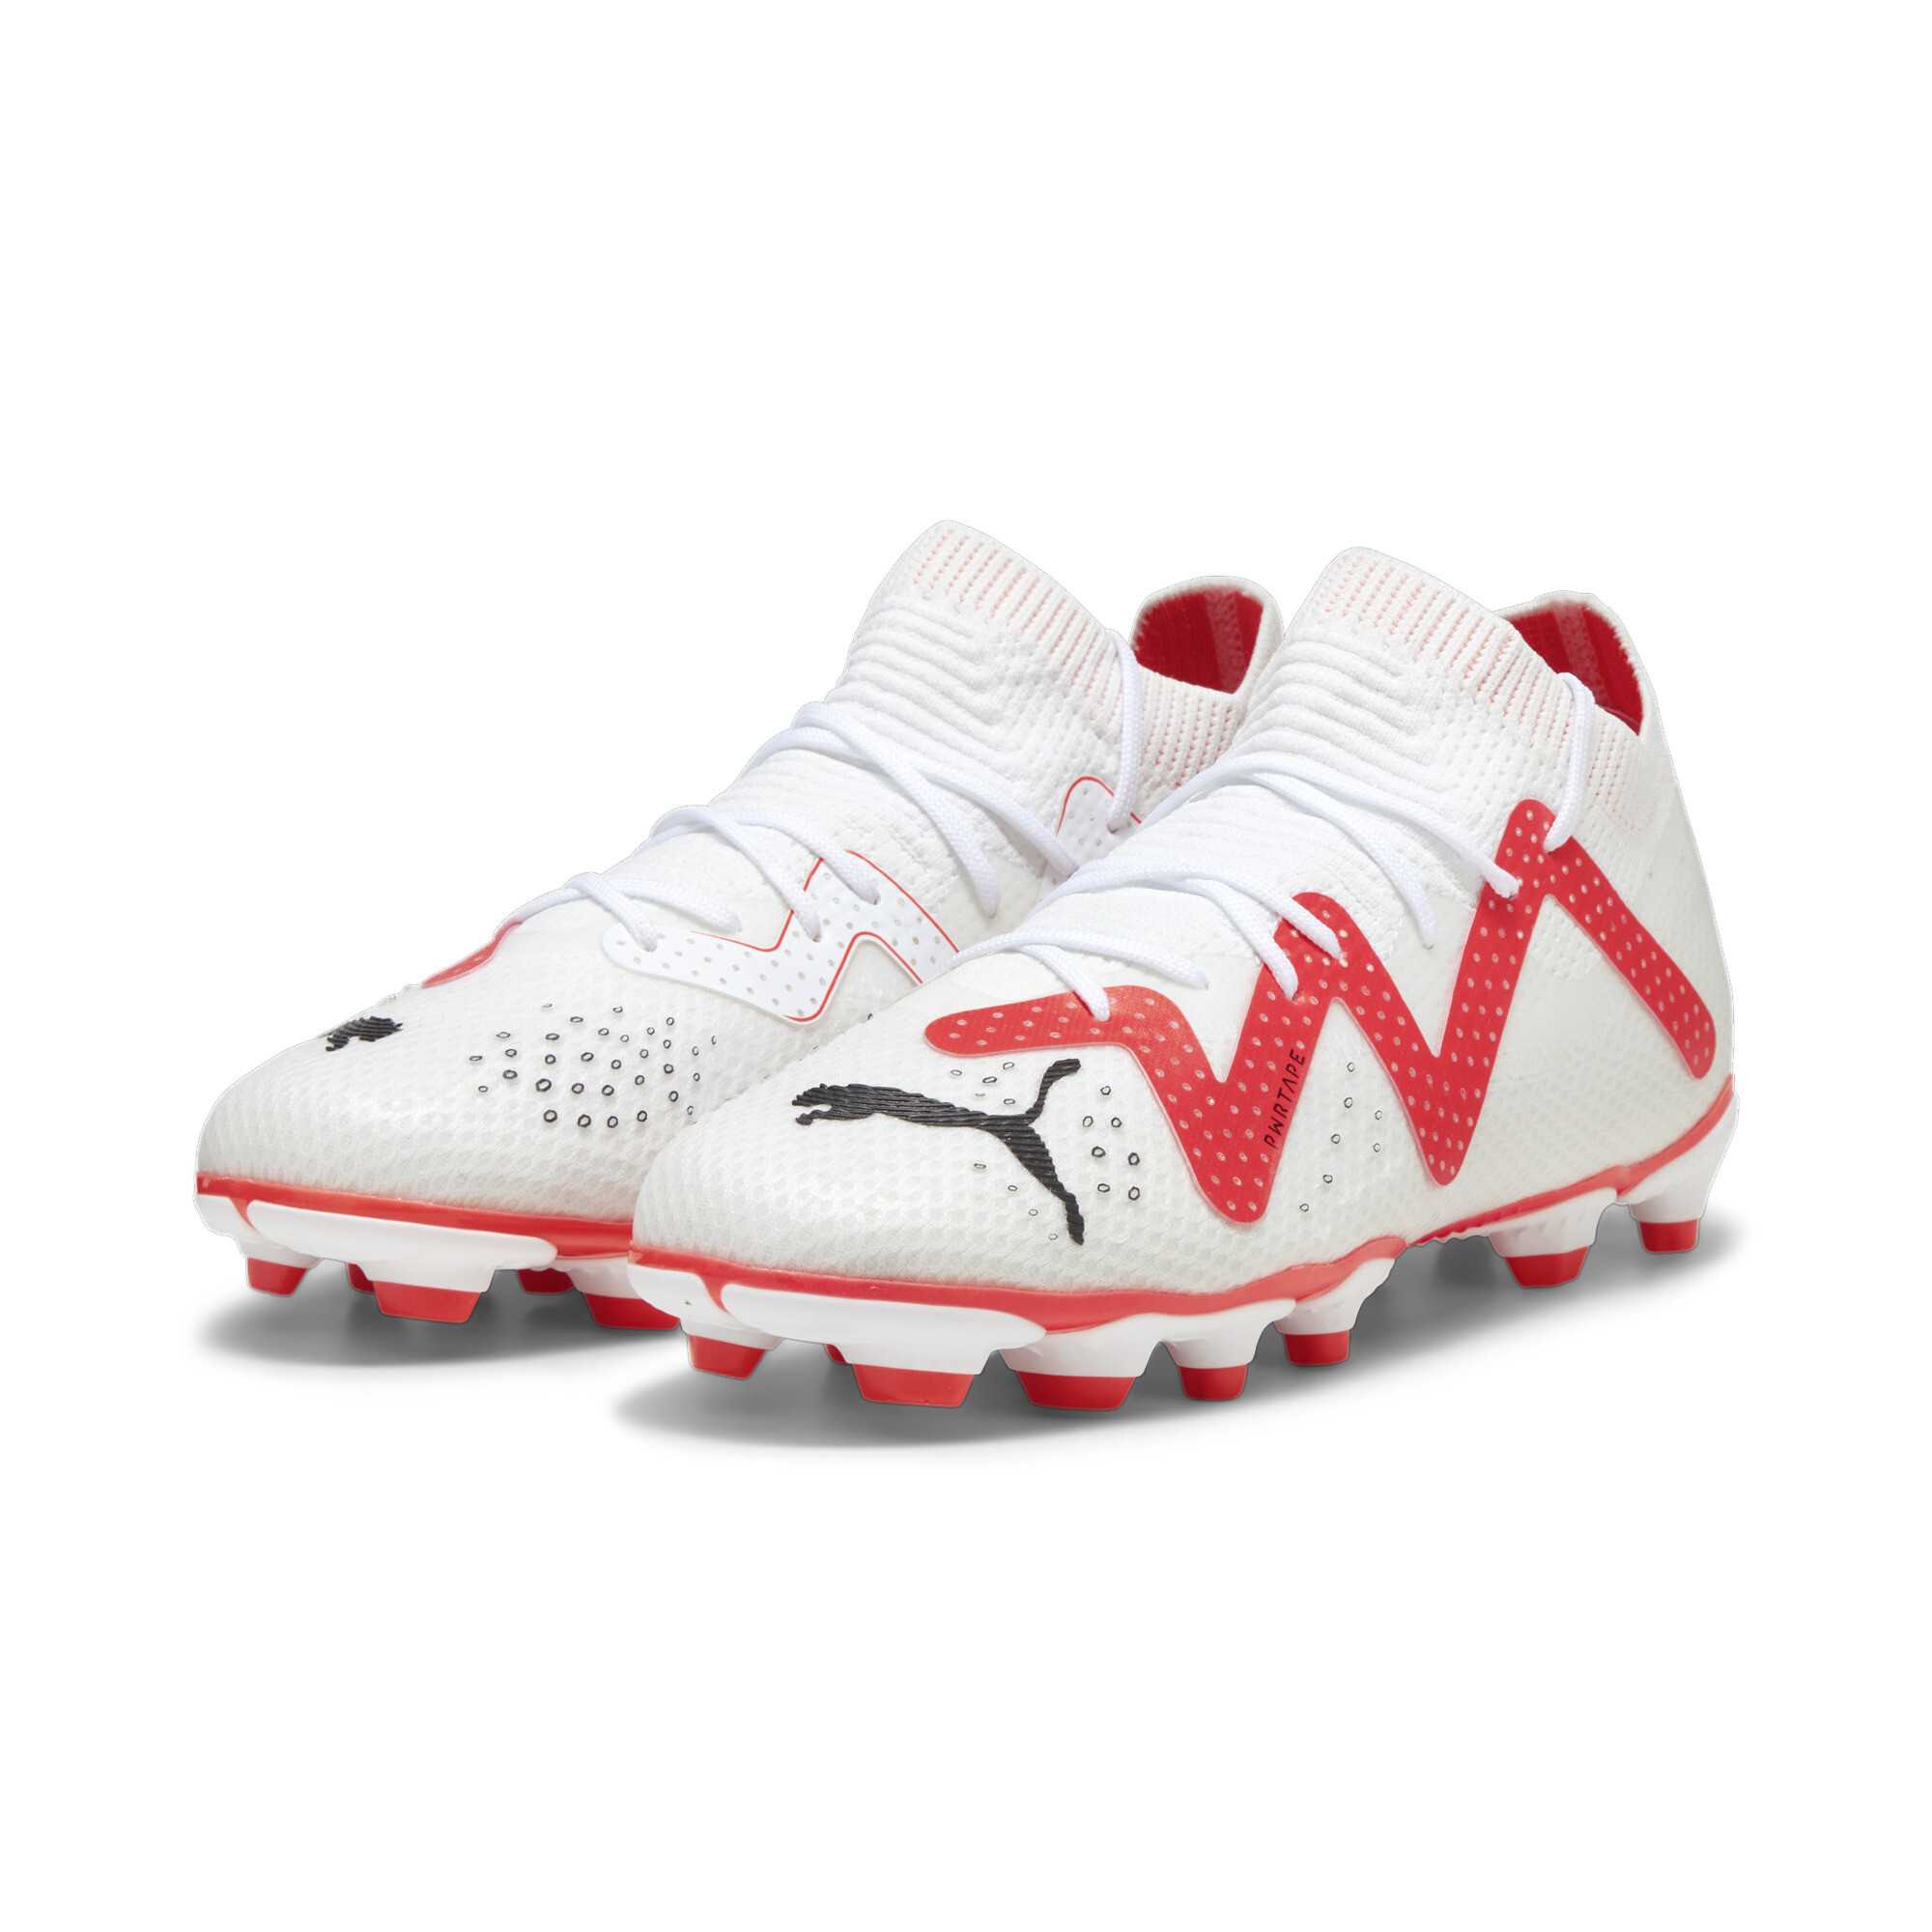 Puma FUTURE PRO FG/AG Youth Football Boots, White, Size 32.5, Shoes